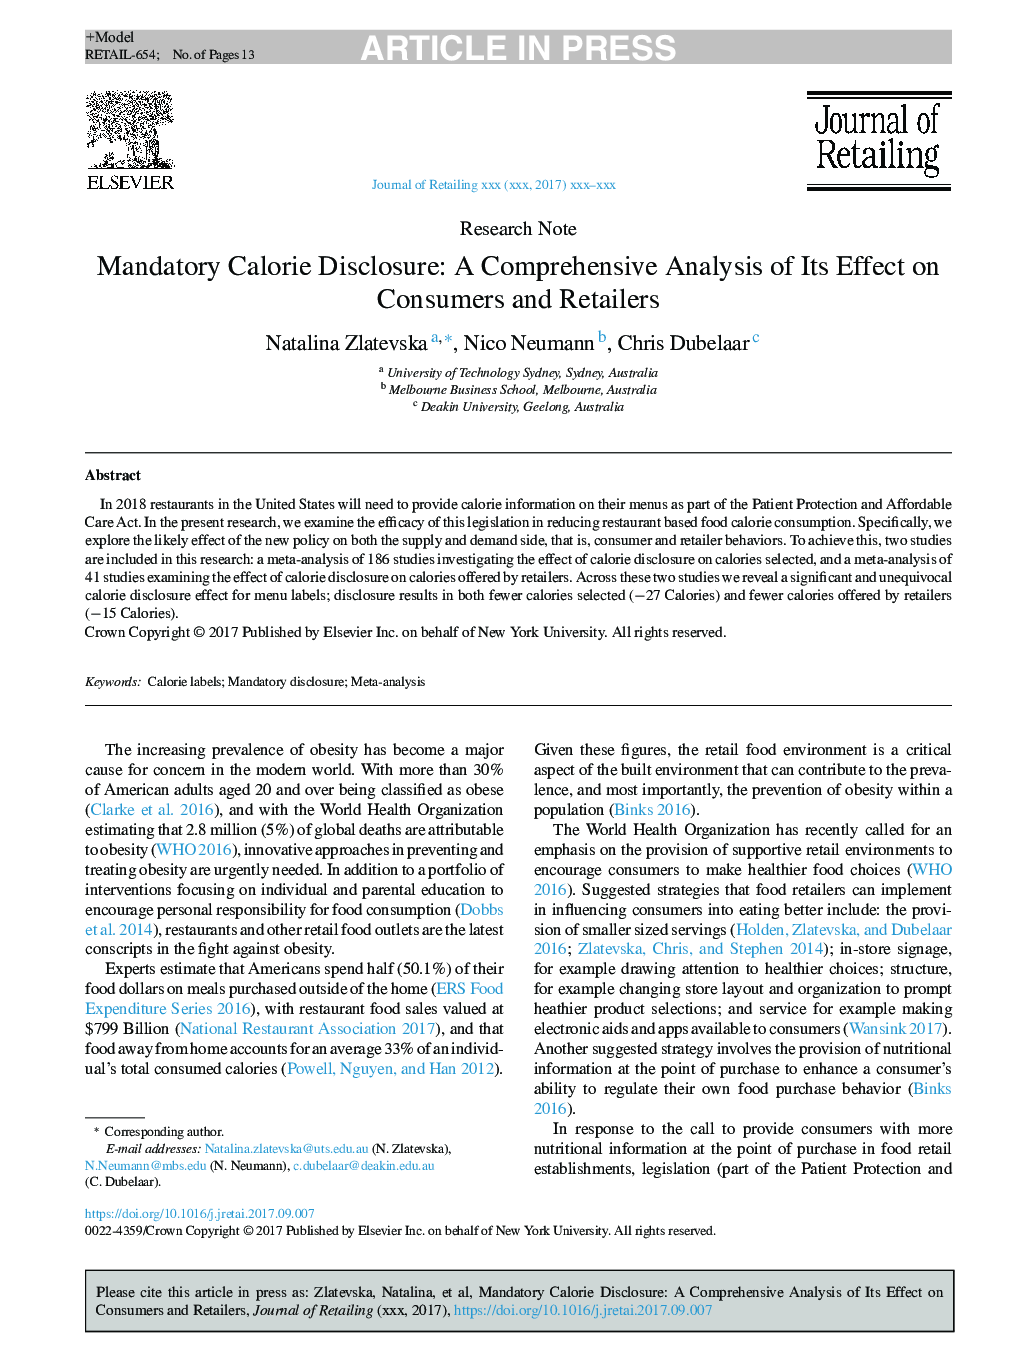 Mandatory Calorie Disclosure: A Comprehensive Analysis of Its Effect on Consumers and Retailers